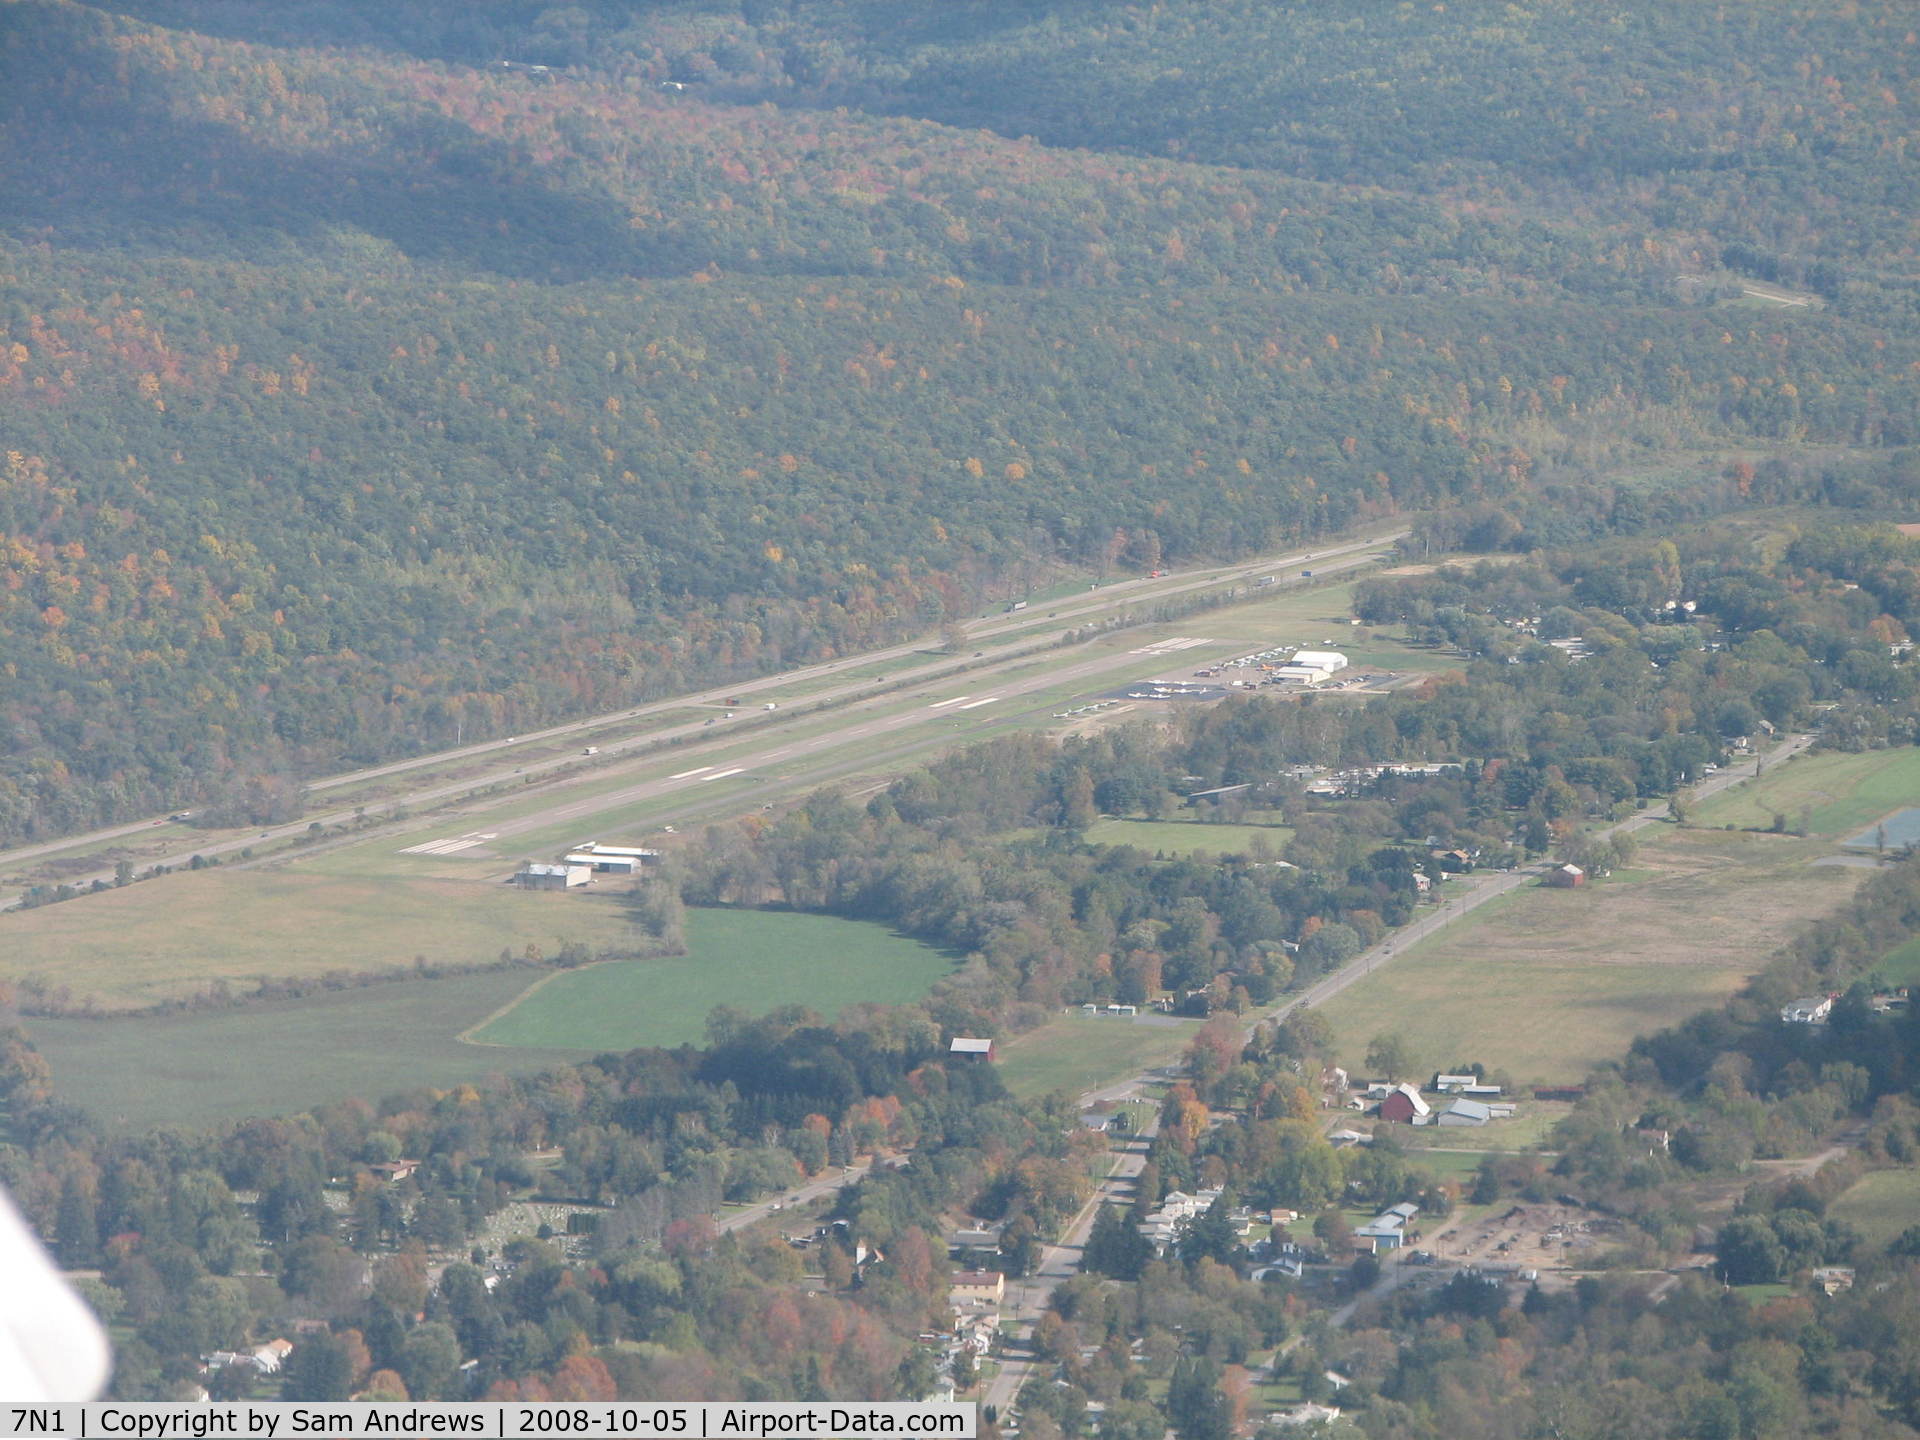 Corning-painted Post Airport (7N1) - Heading home after lunch